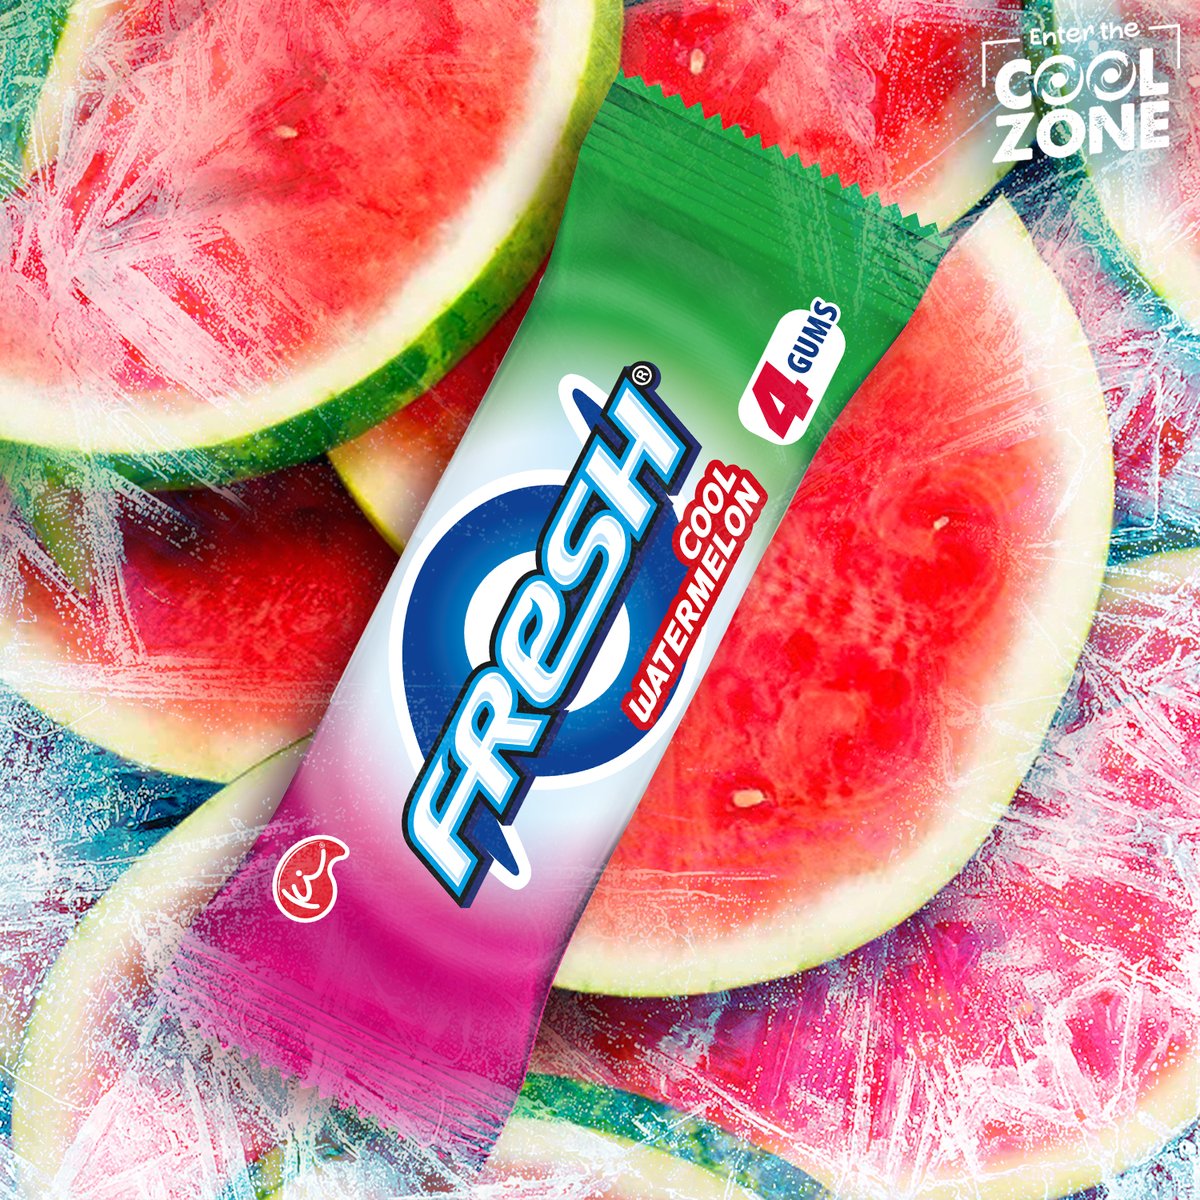 When life gives you lemons, get Fresh Watermelon. It’s the perfect pick-me-up! #EnterTheCoolZone #FreshChewingGum